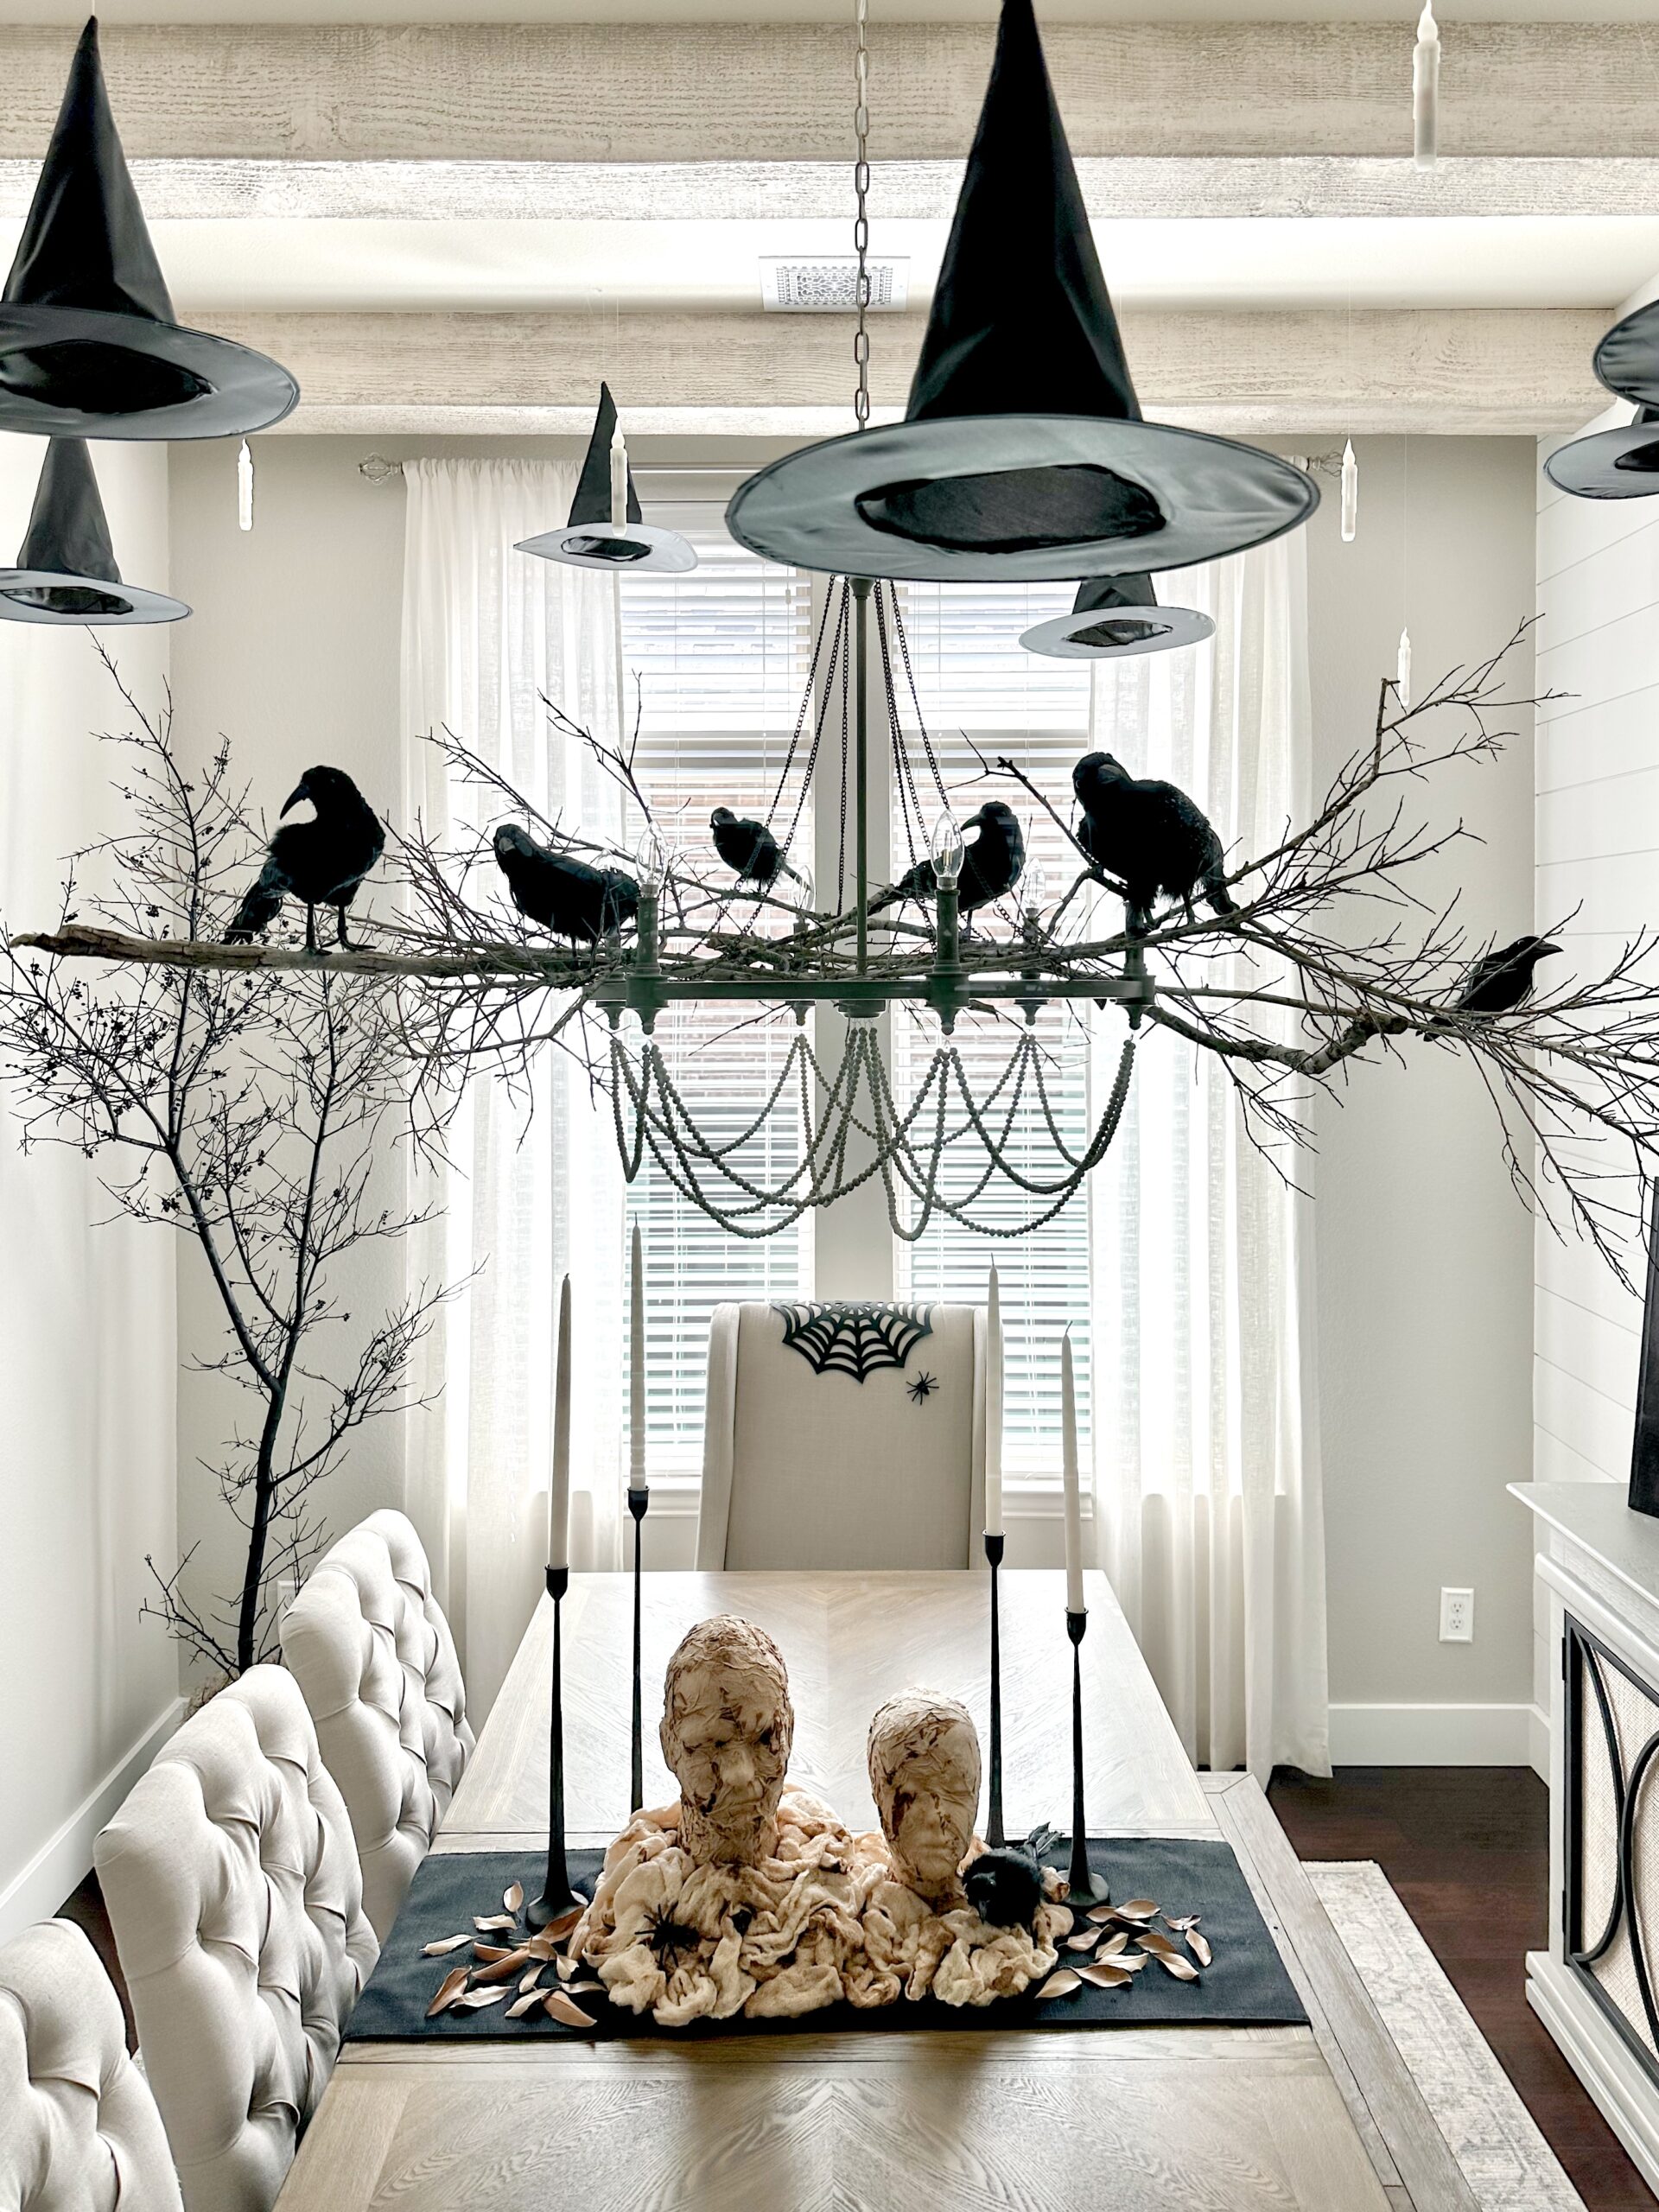 Spooky Halloween Tablescape with Mummy Decor and Crow Accents